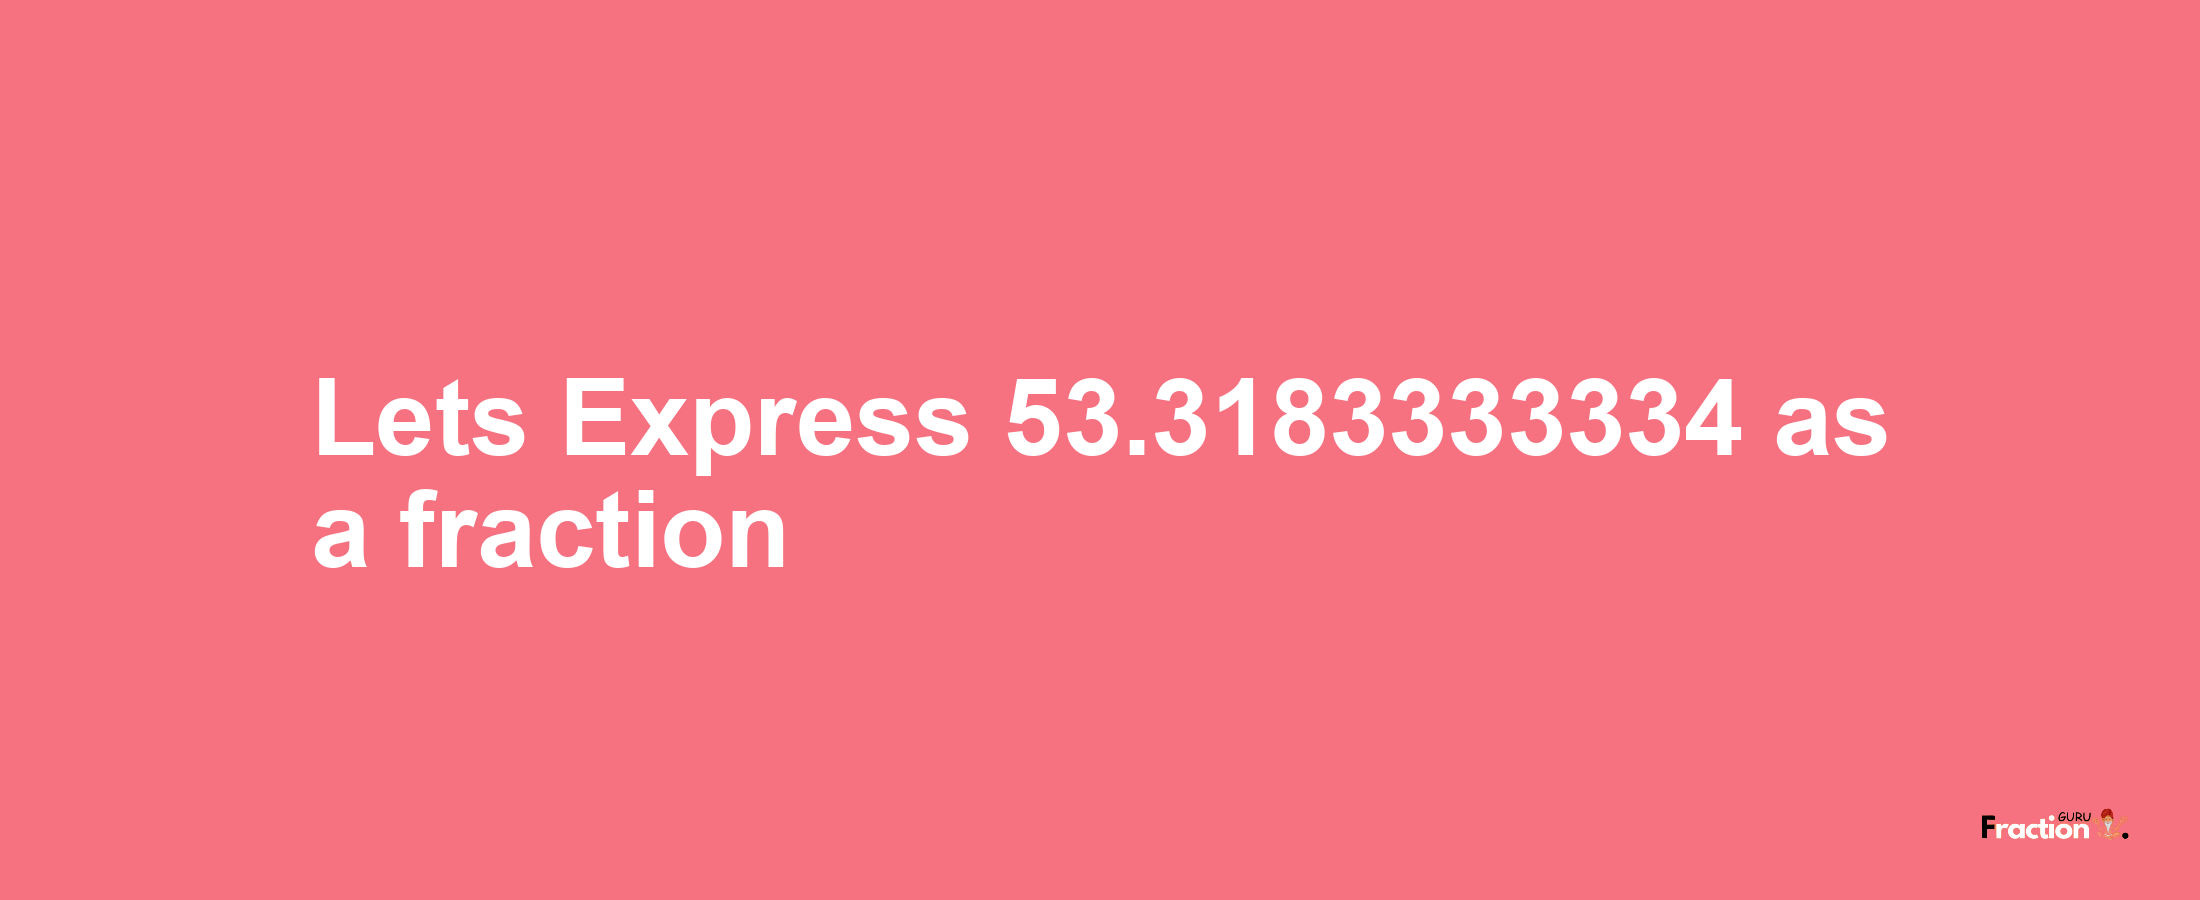 Lets Express 53.3183333334 as afraction